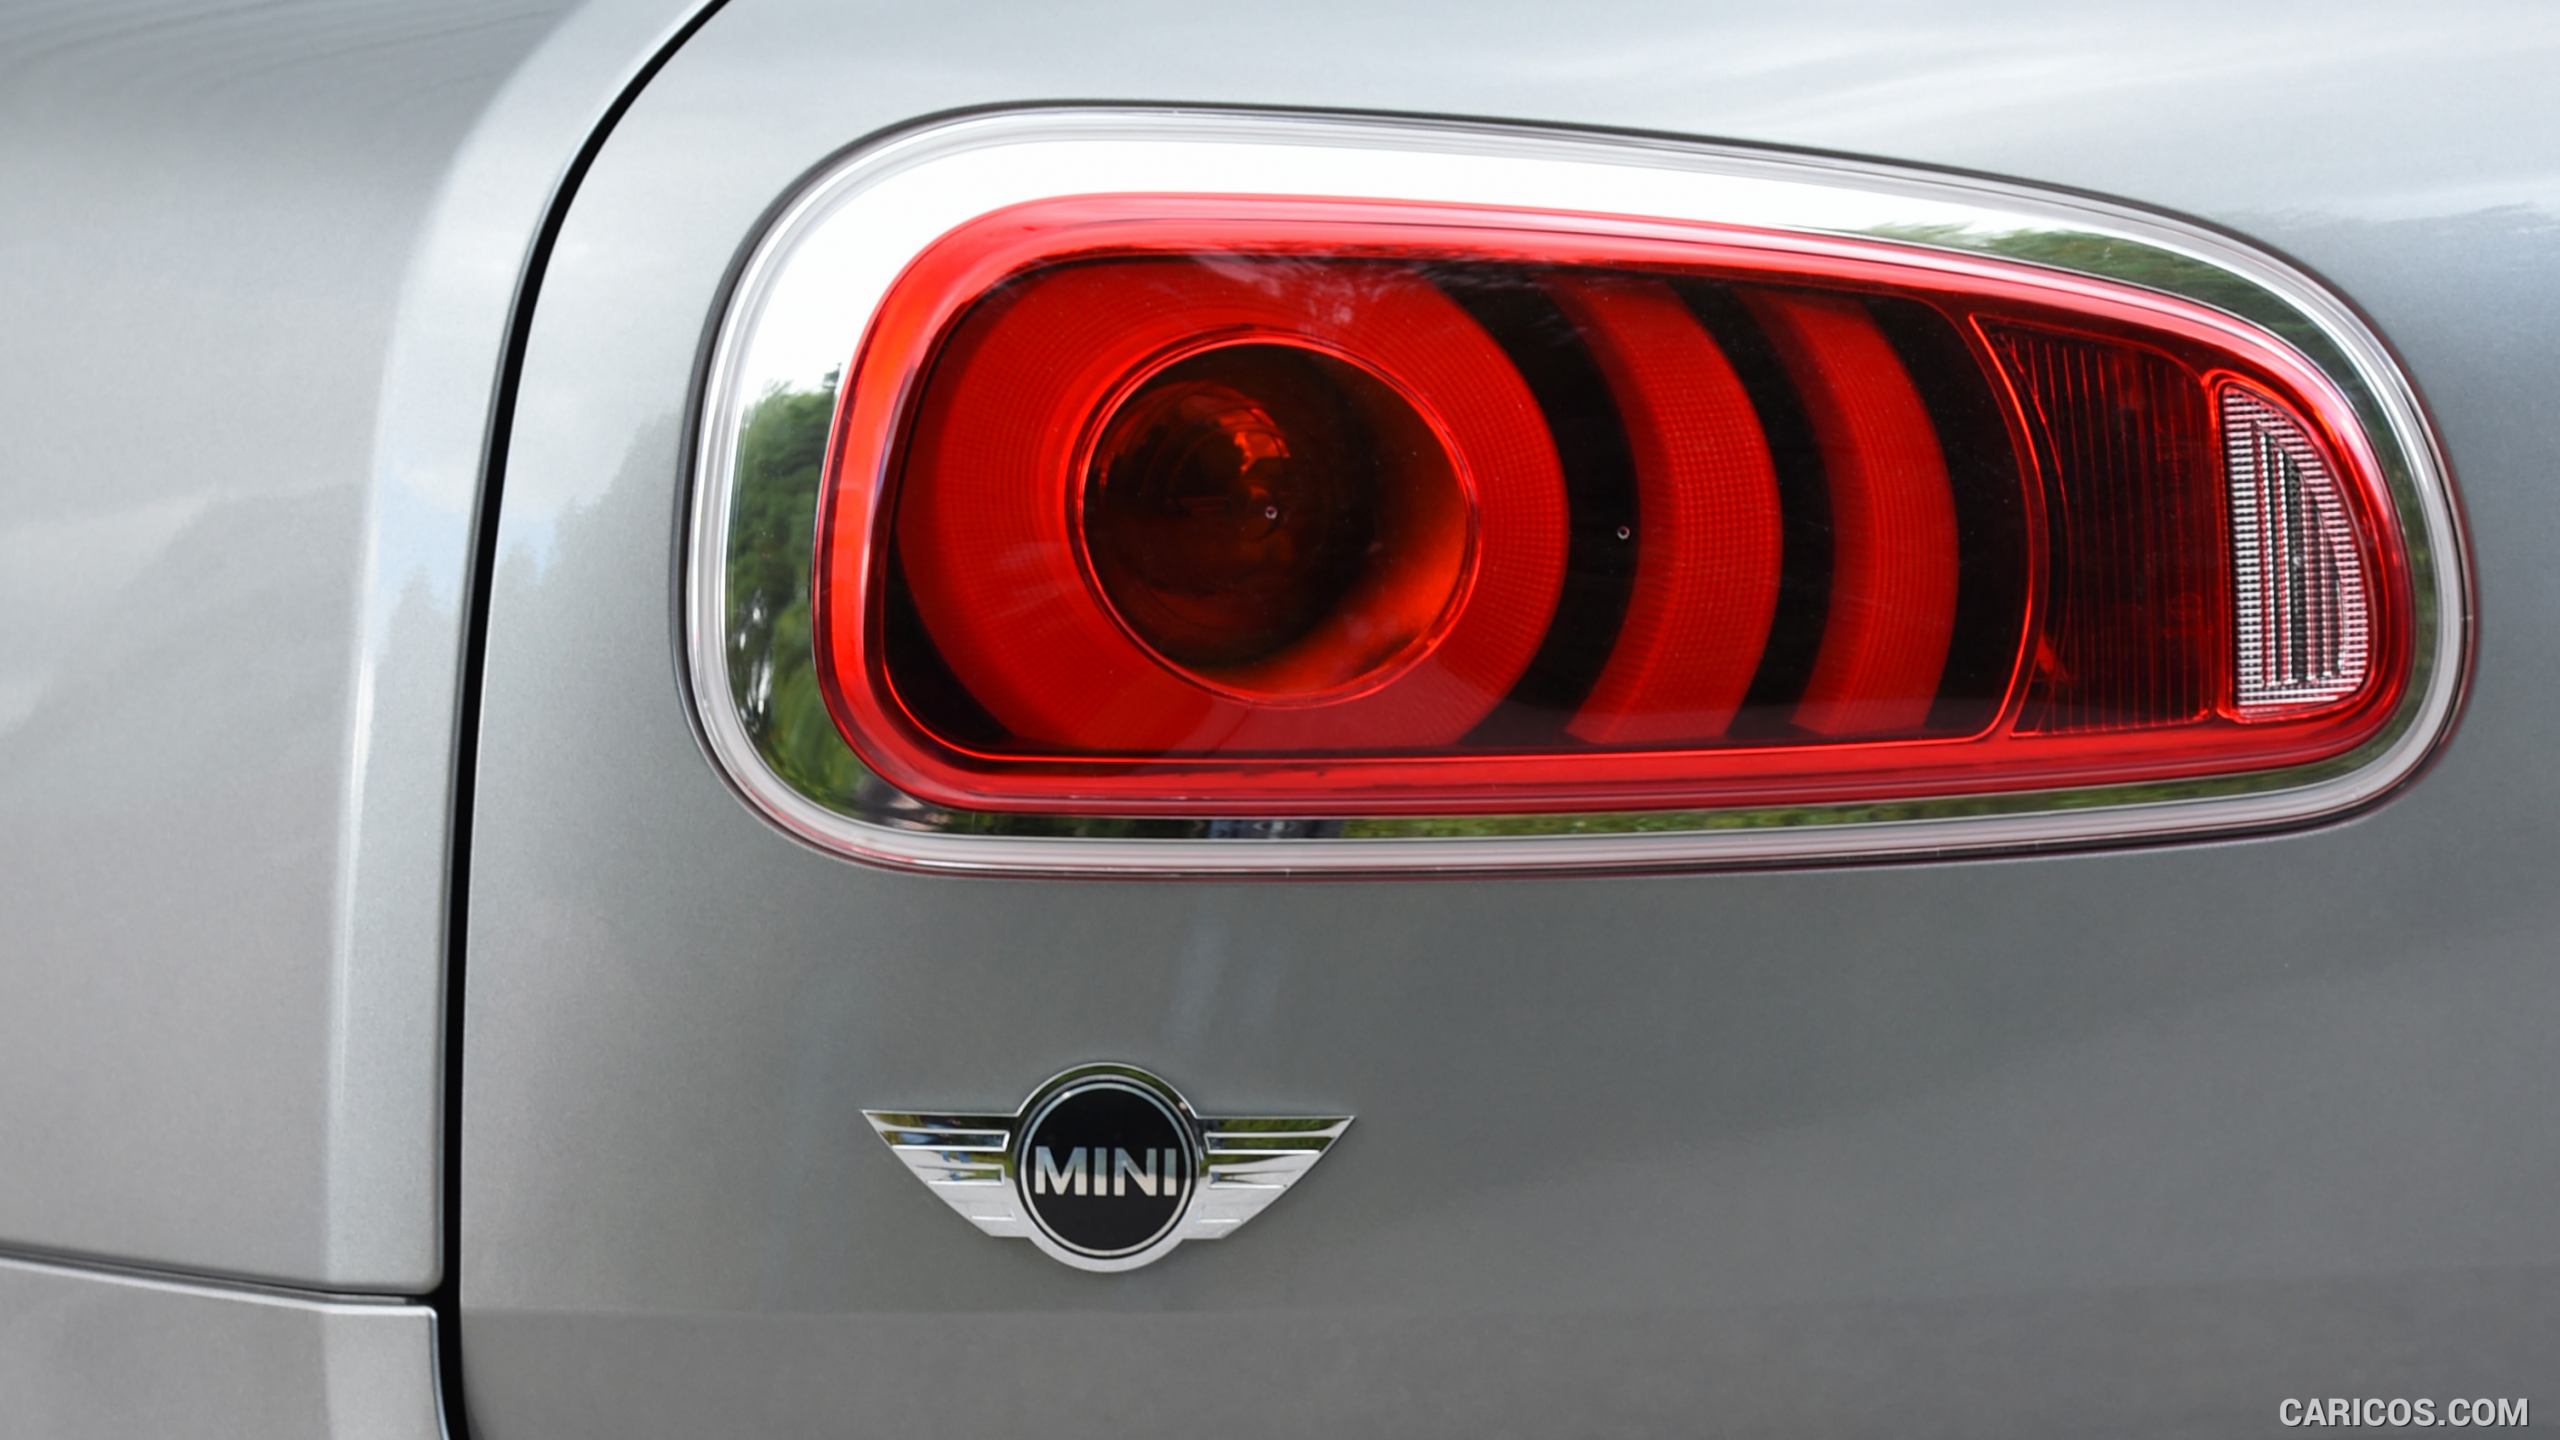 2016 MINI Cooper S Clubman in Metallic Melting Silver - Tail Light, #215 of 380